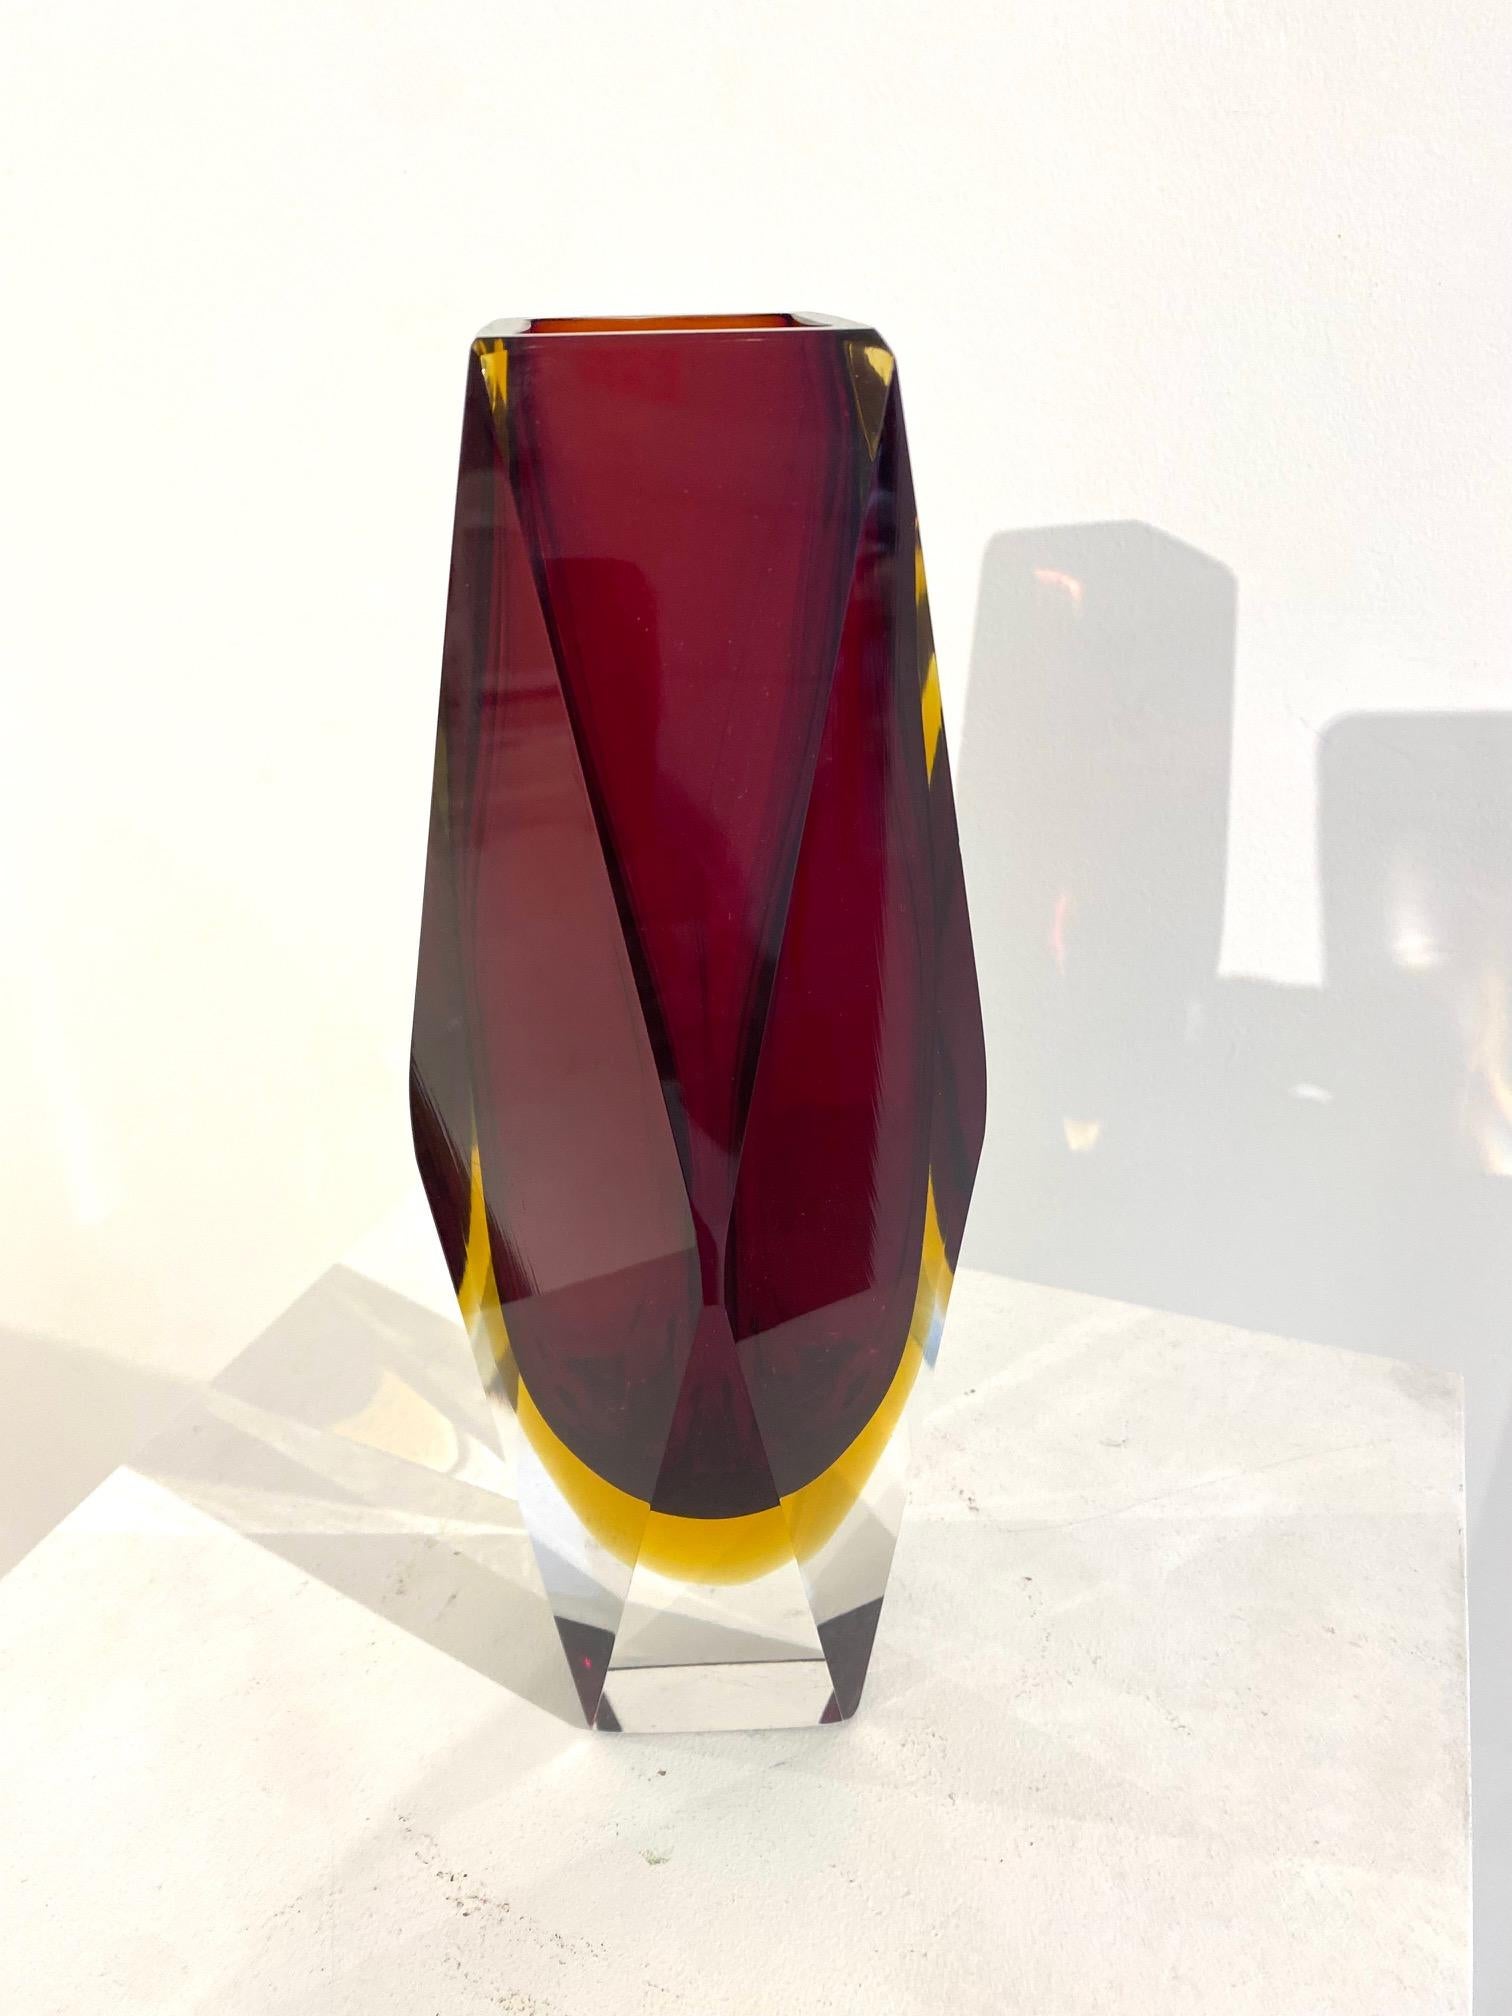 Late 20th Century Ruby Red  Faceted  Glass Vase Murano Sommerso  by Alessandro Mandruzzato  For Sale